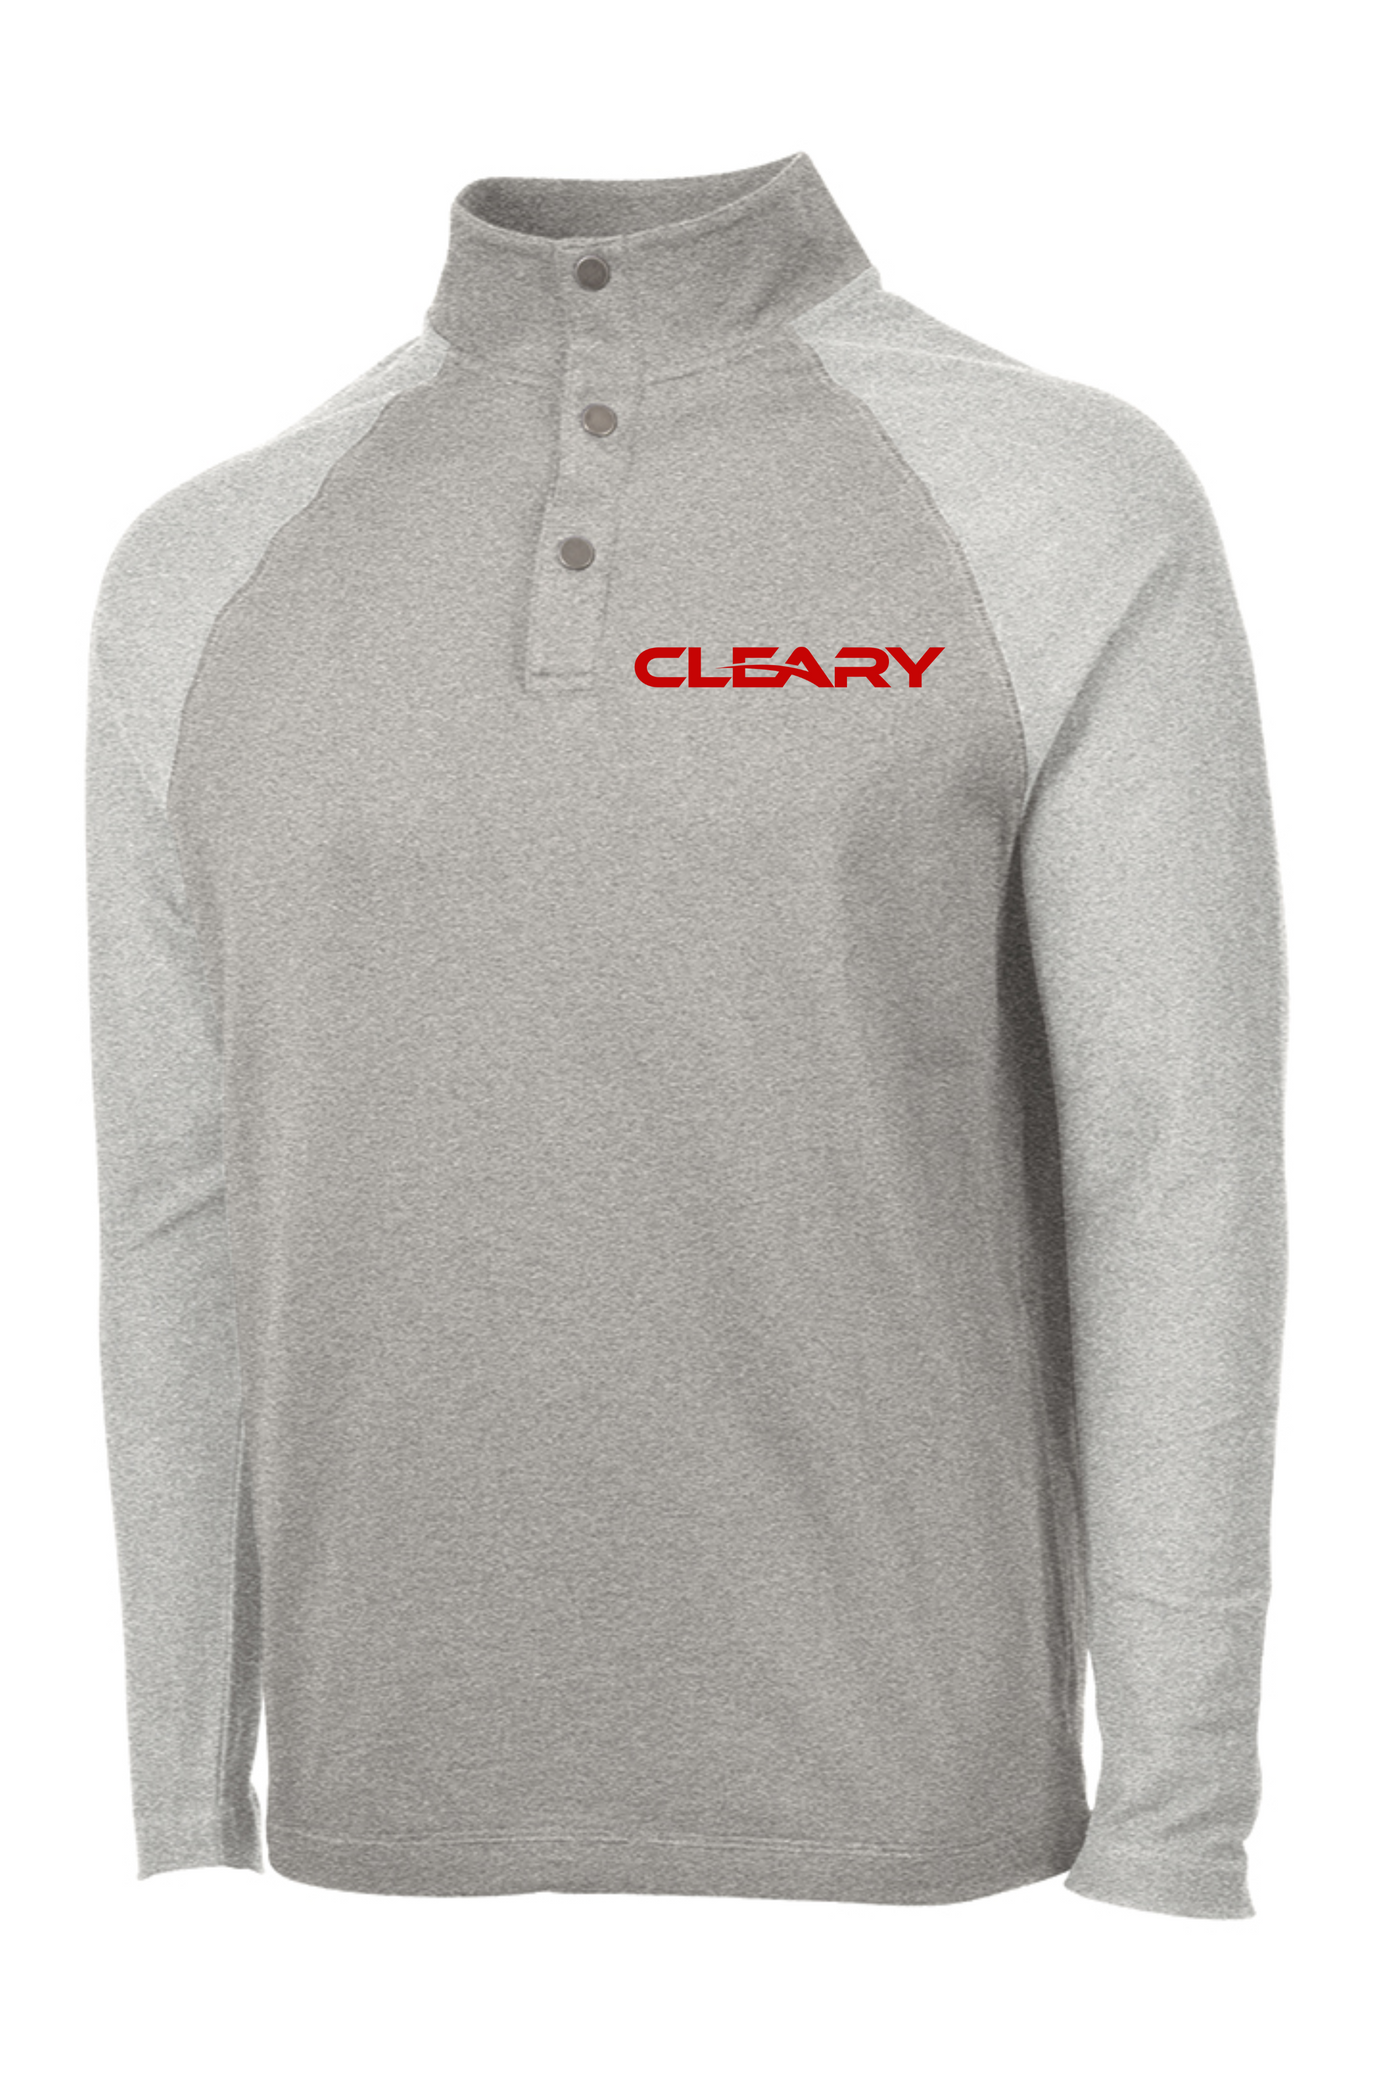 Cleary's Men's Falmouth Pullover Heather Grey